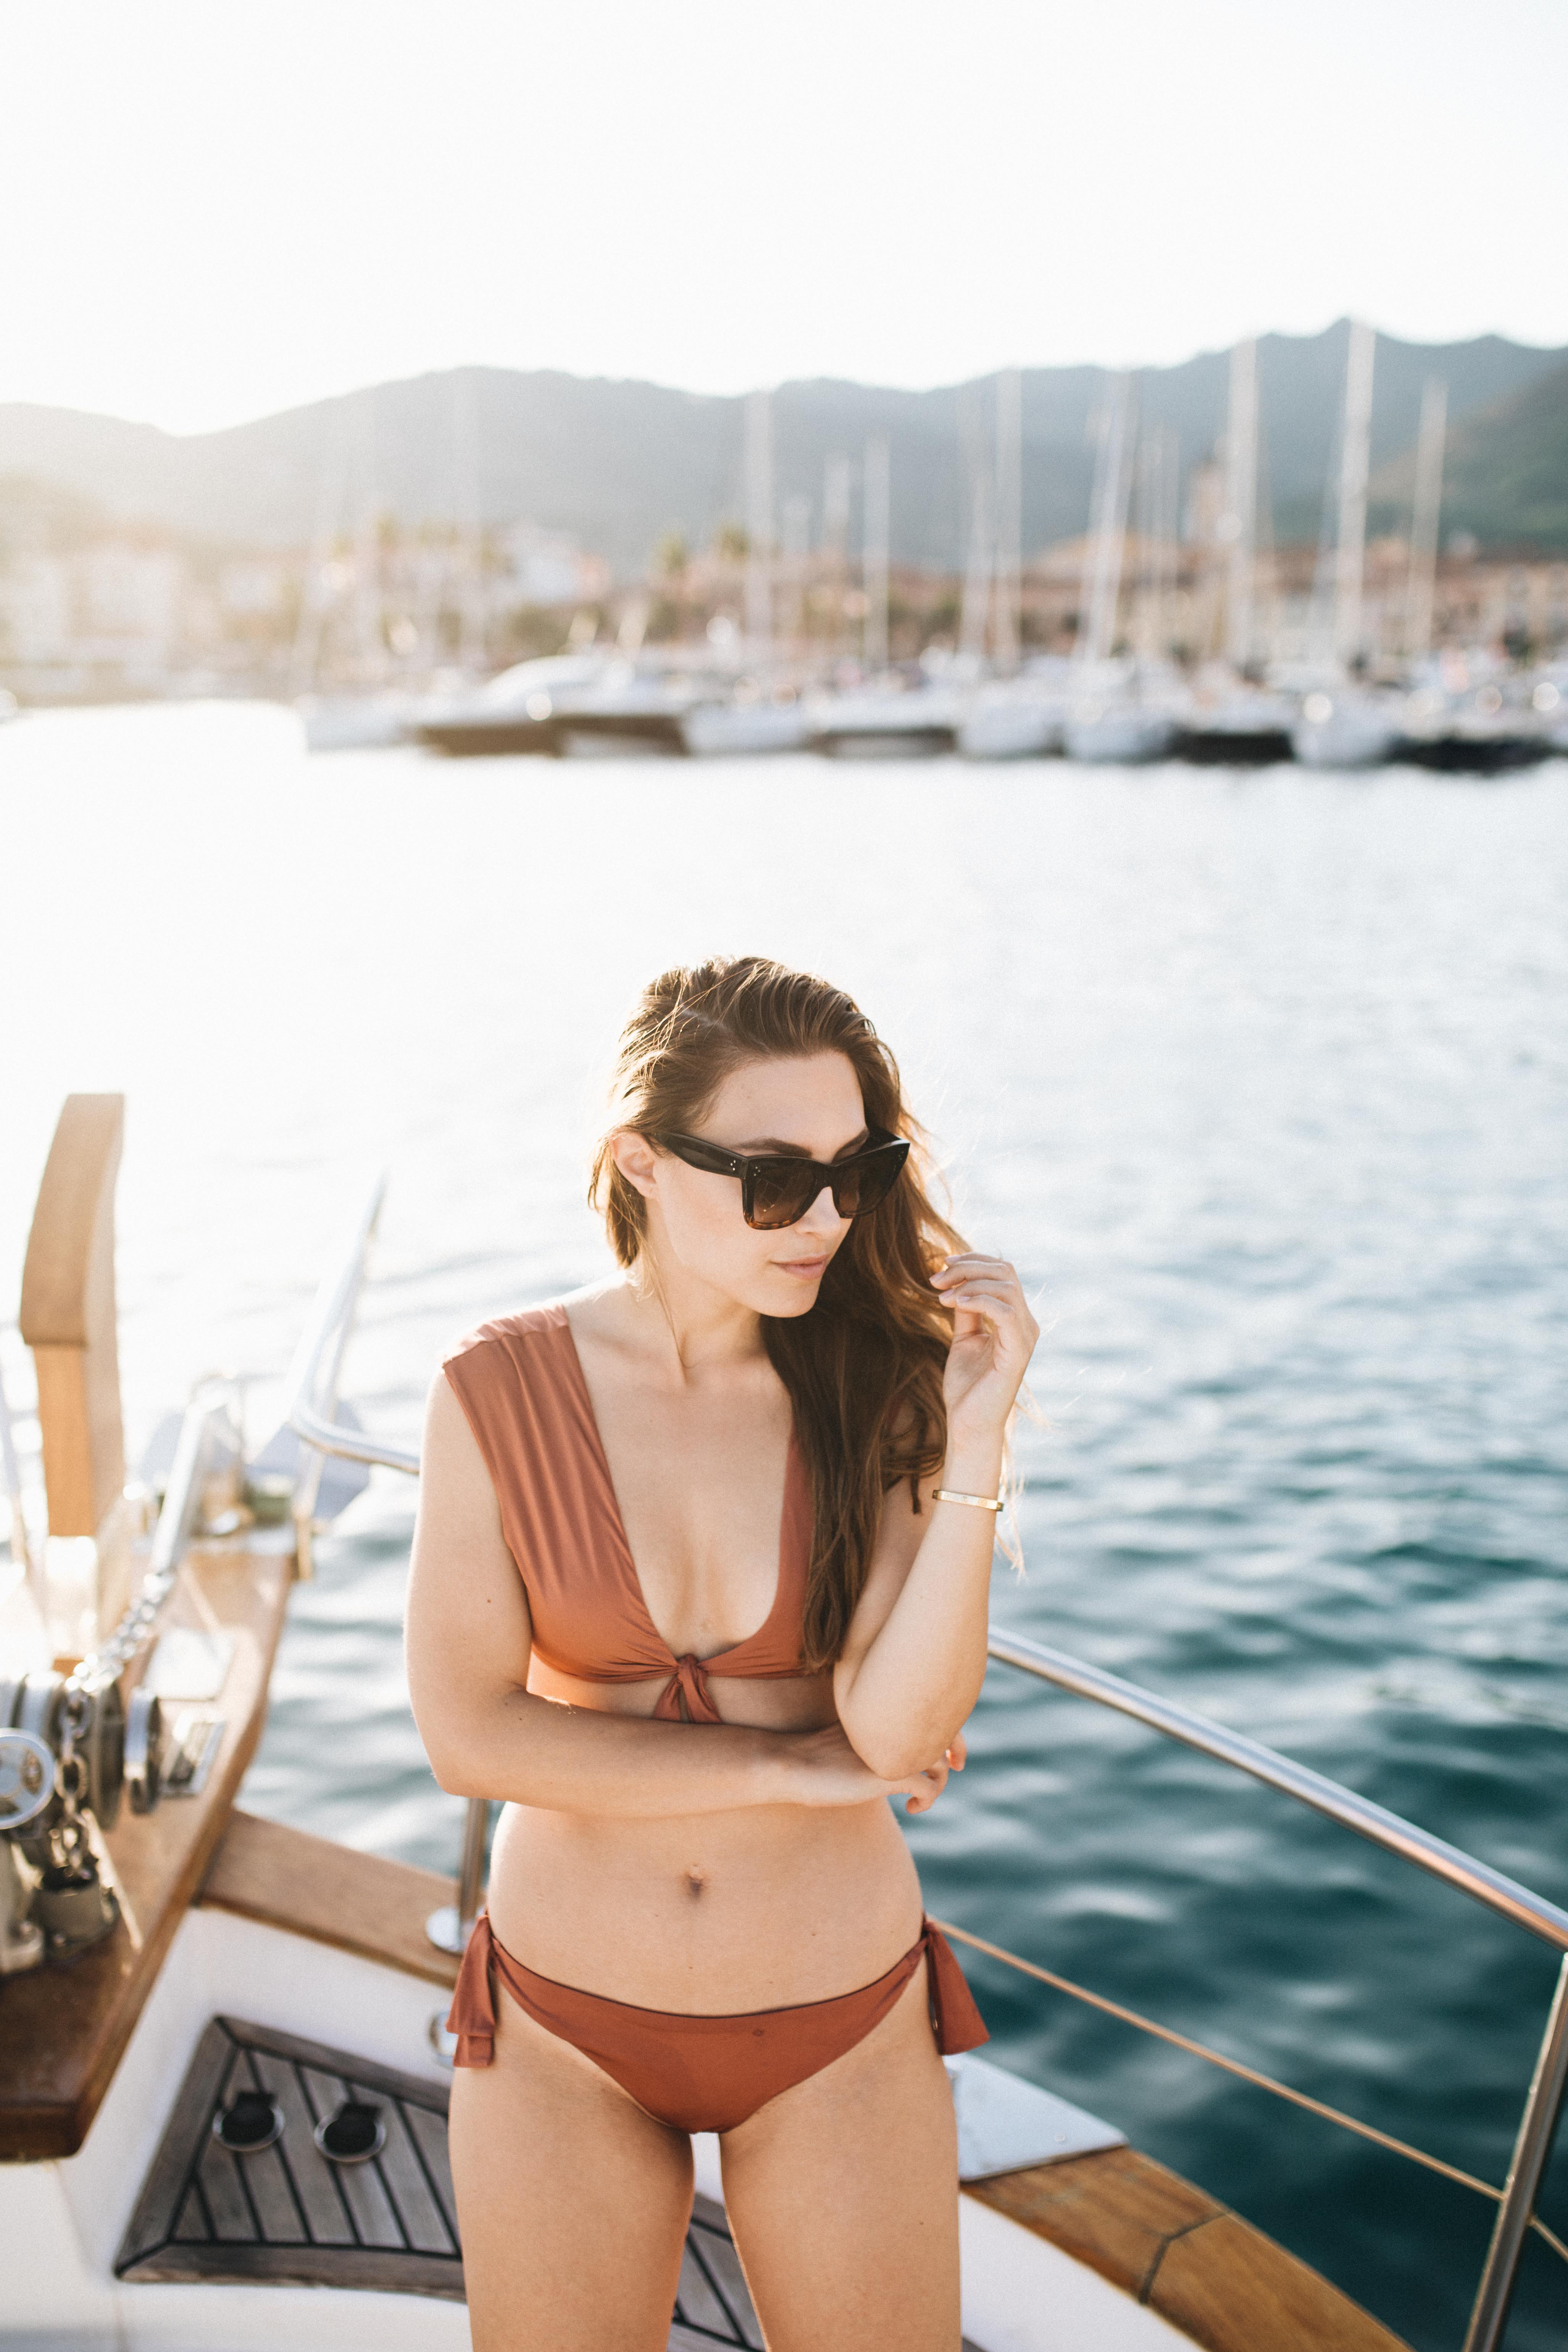 Wanderlust: Vacation Greetings From Elba! | Boat Holiday in Italy | You Rock My Life